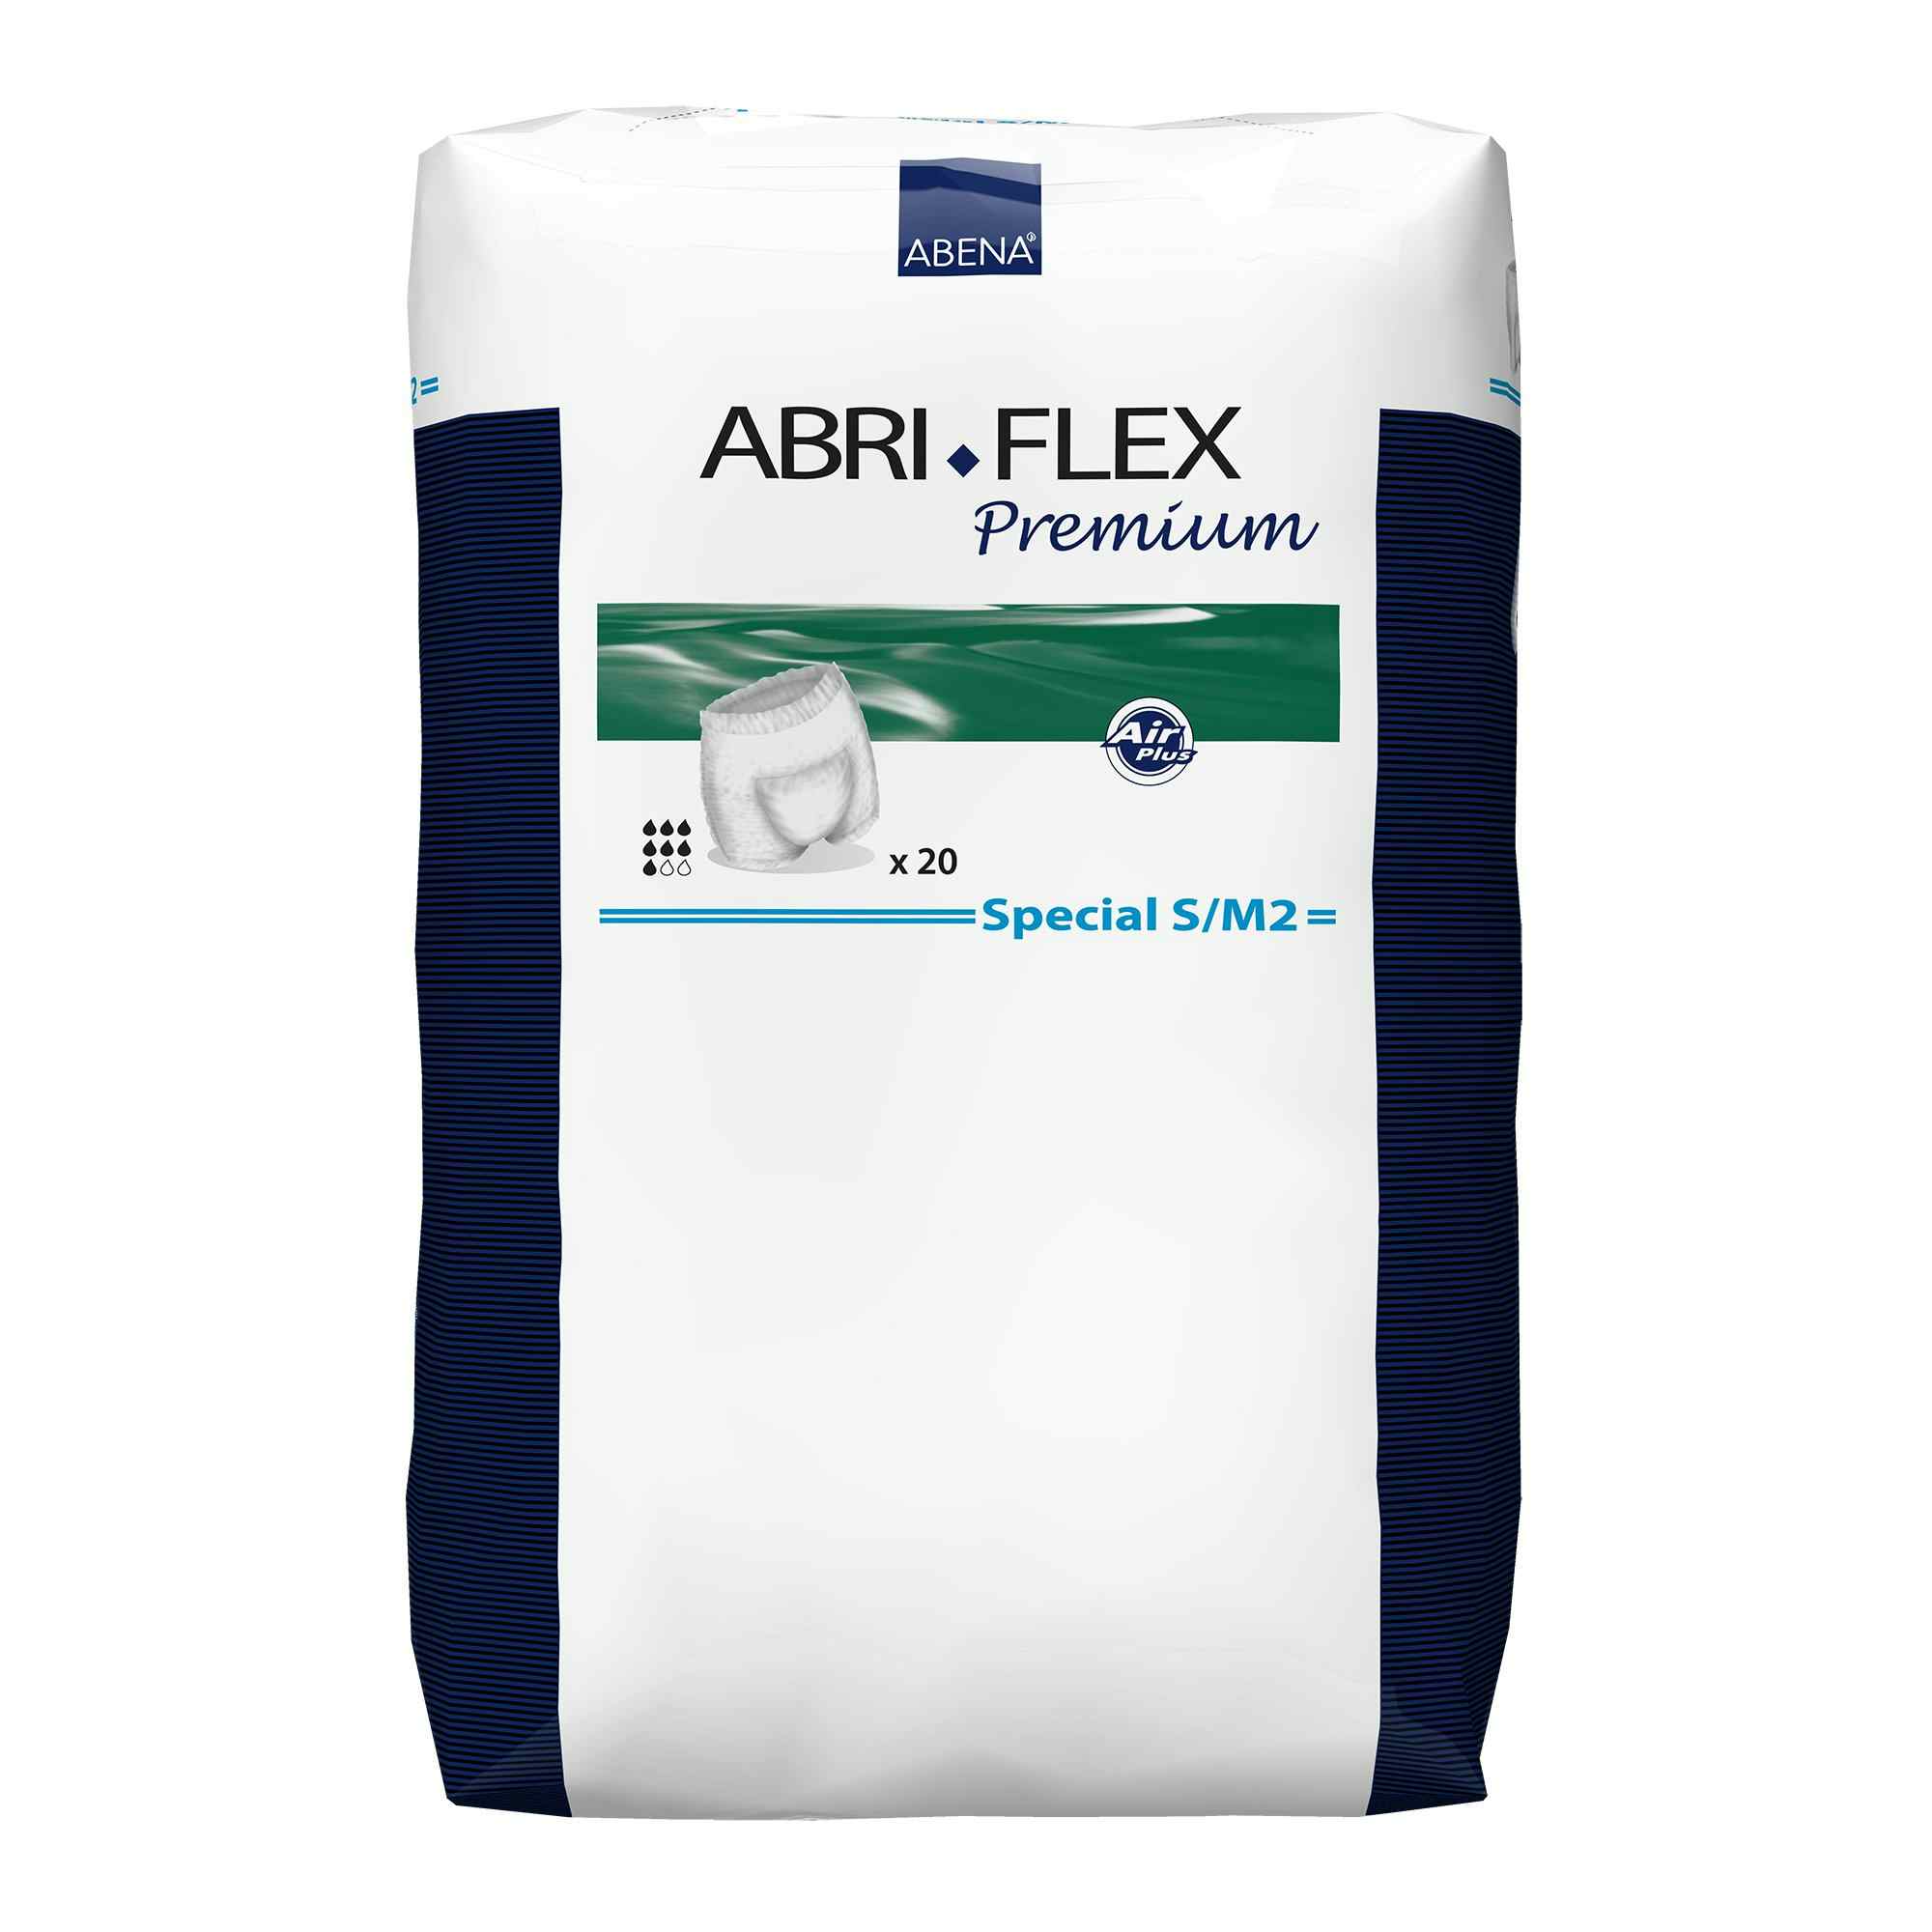 Abri-Flex Special Unisex Adult  Disposable Pull On Diaper with Tear Away Seams, Moderate Absorbency, 41073, Small/Medium (24-43") - Bag of 20